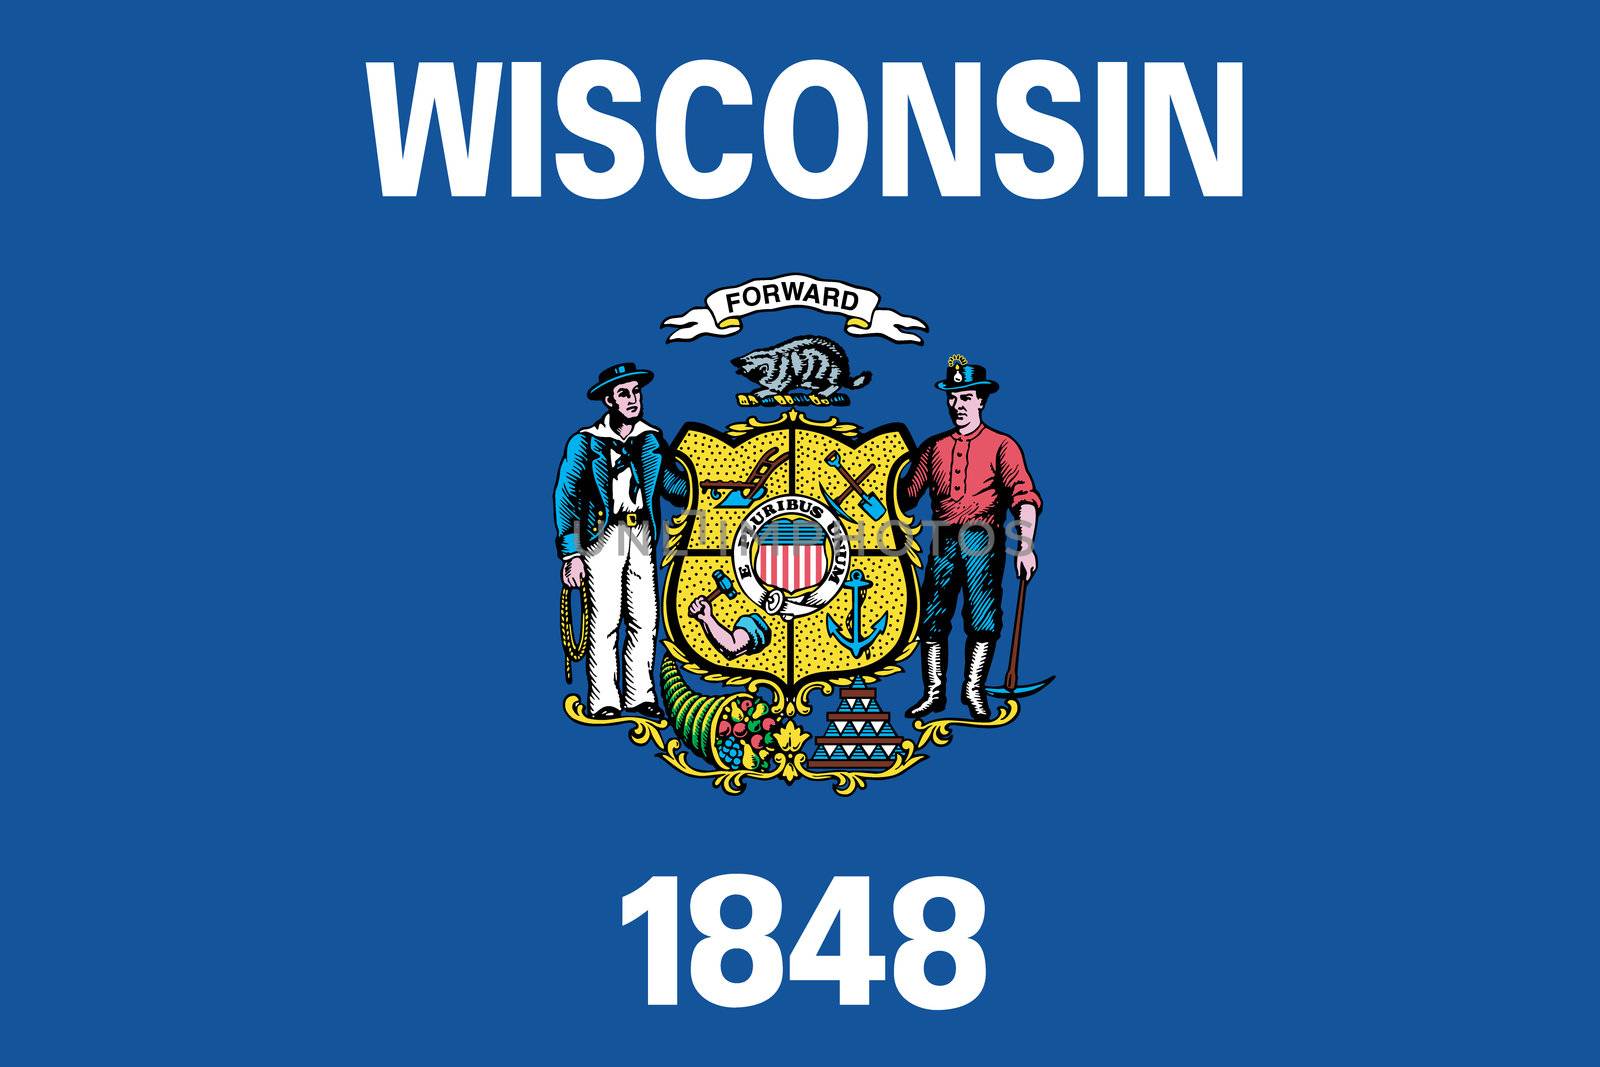 The Flag of the American State of Wisconsin